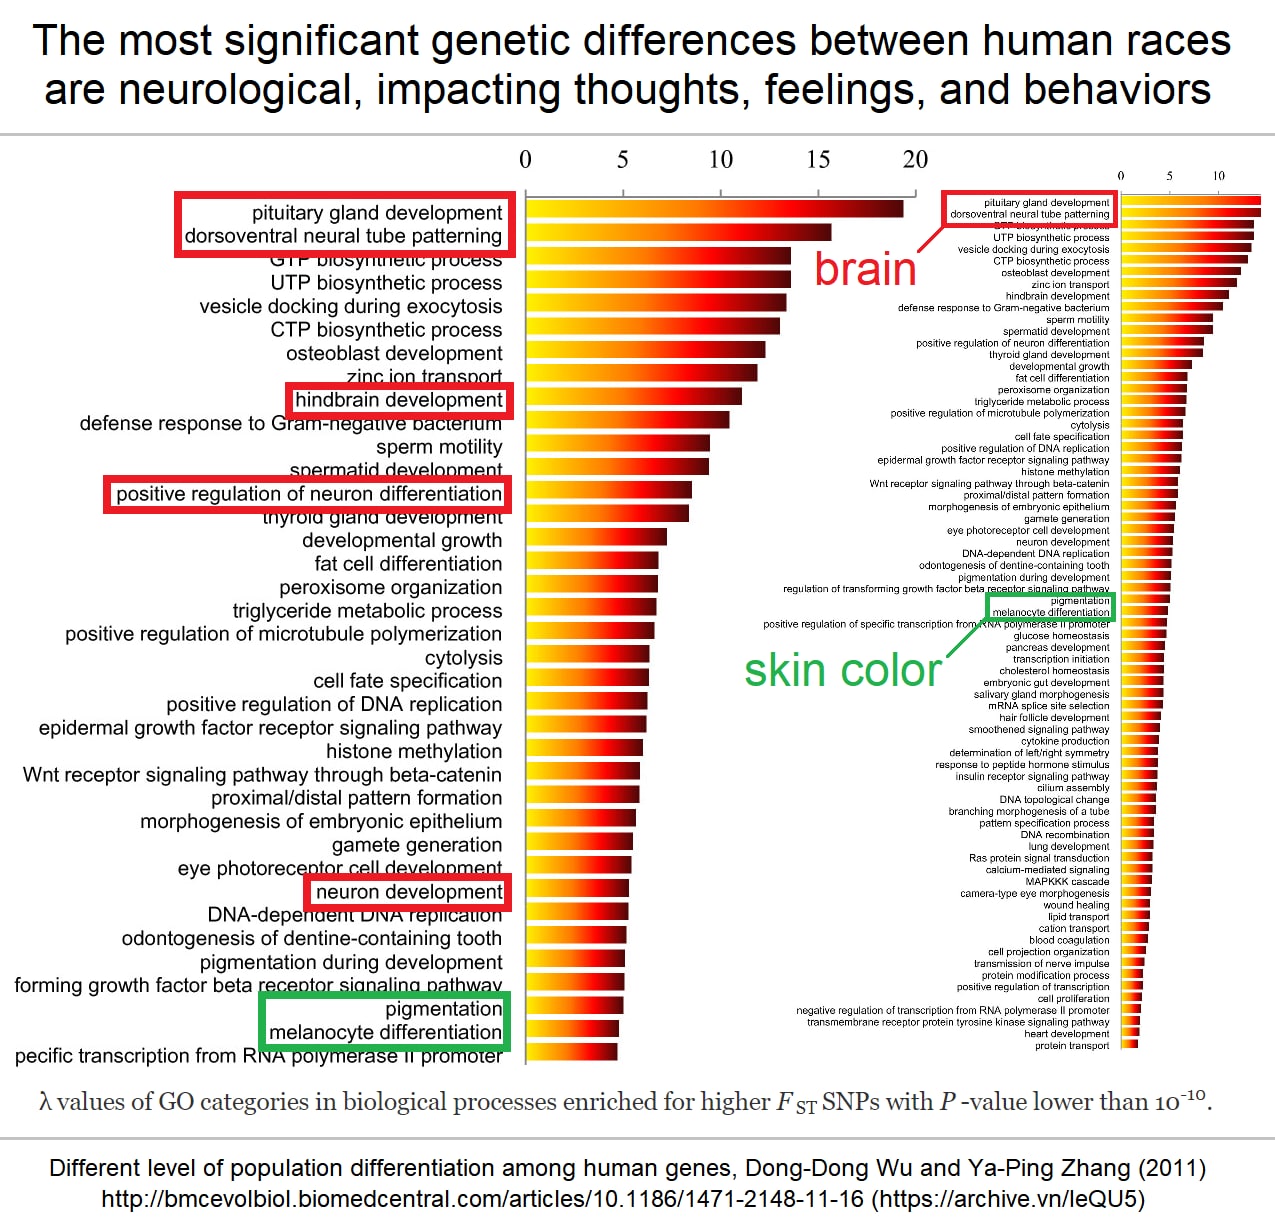 The most significant genetic differences between races are mental traits.